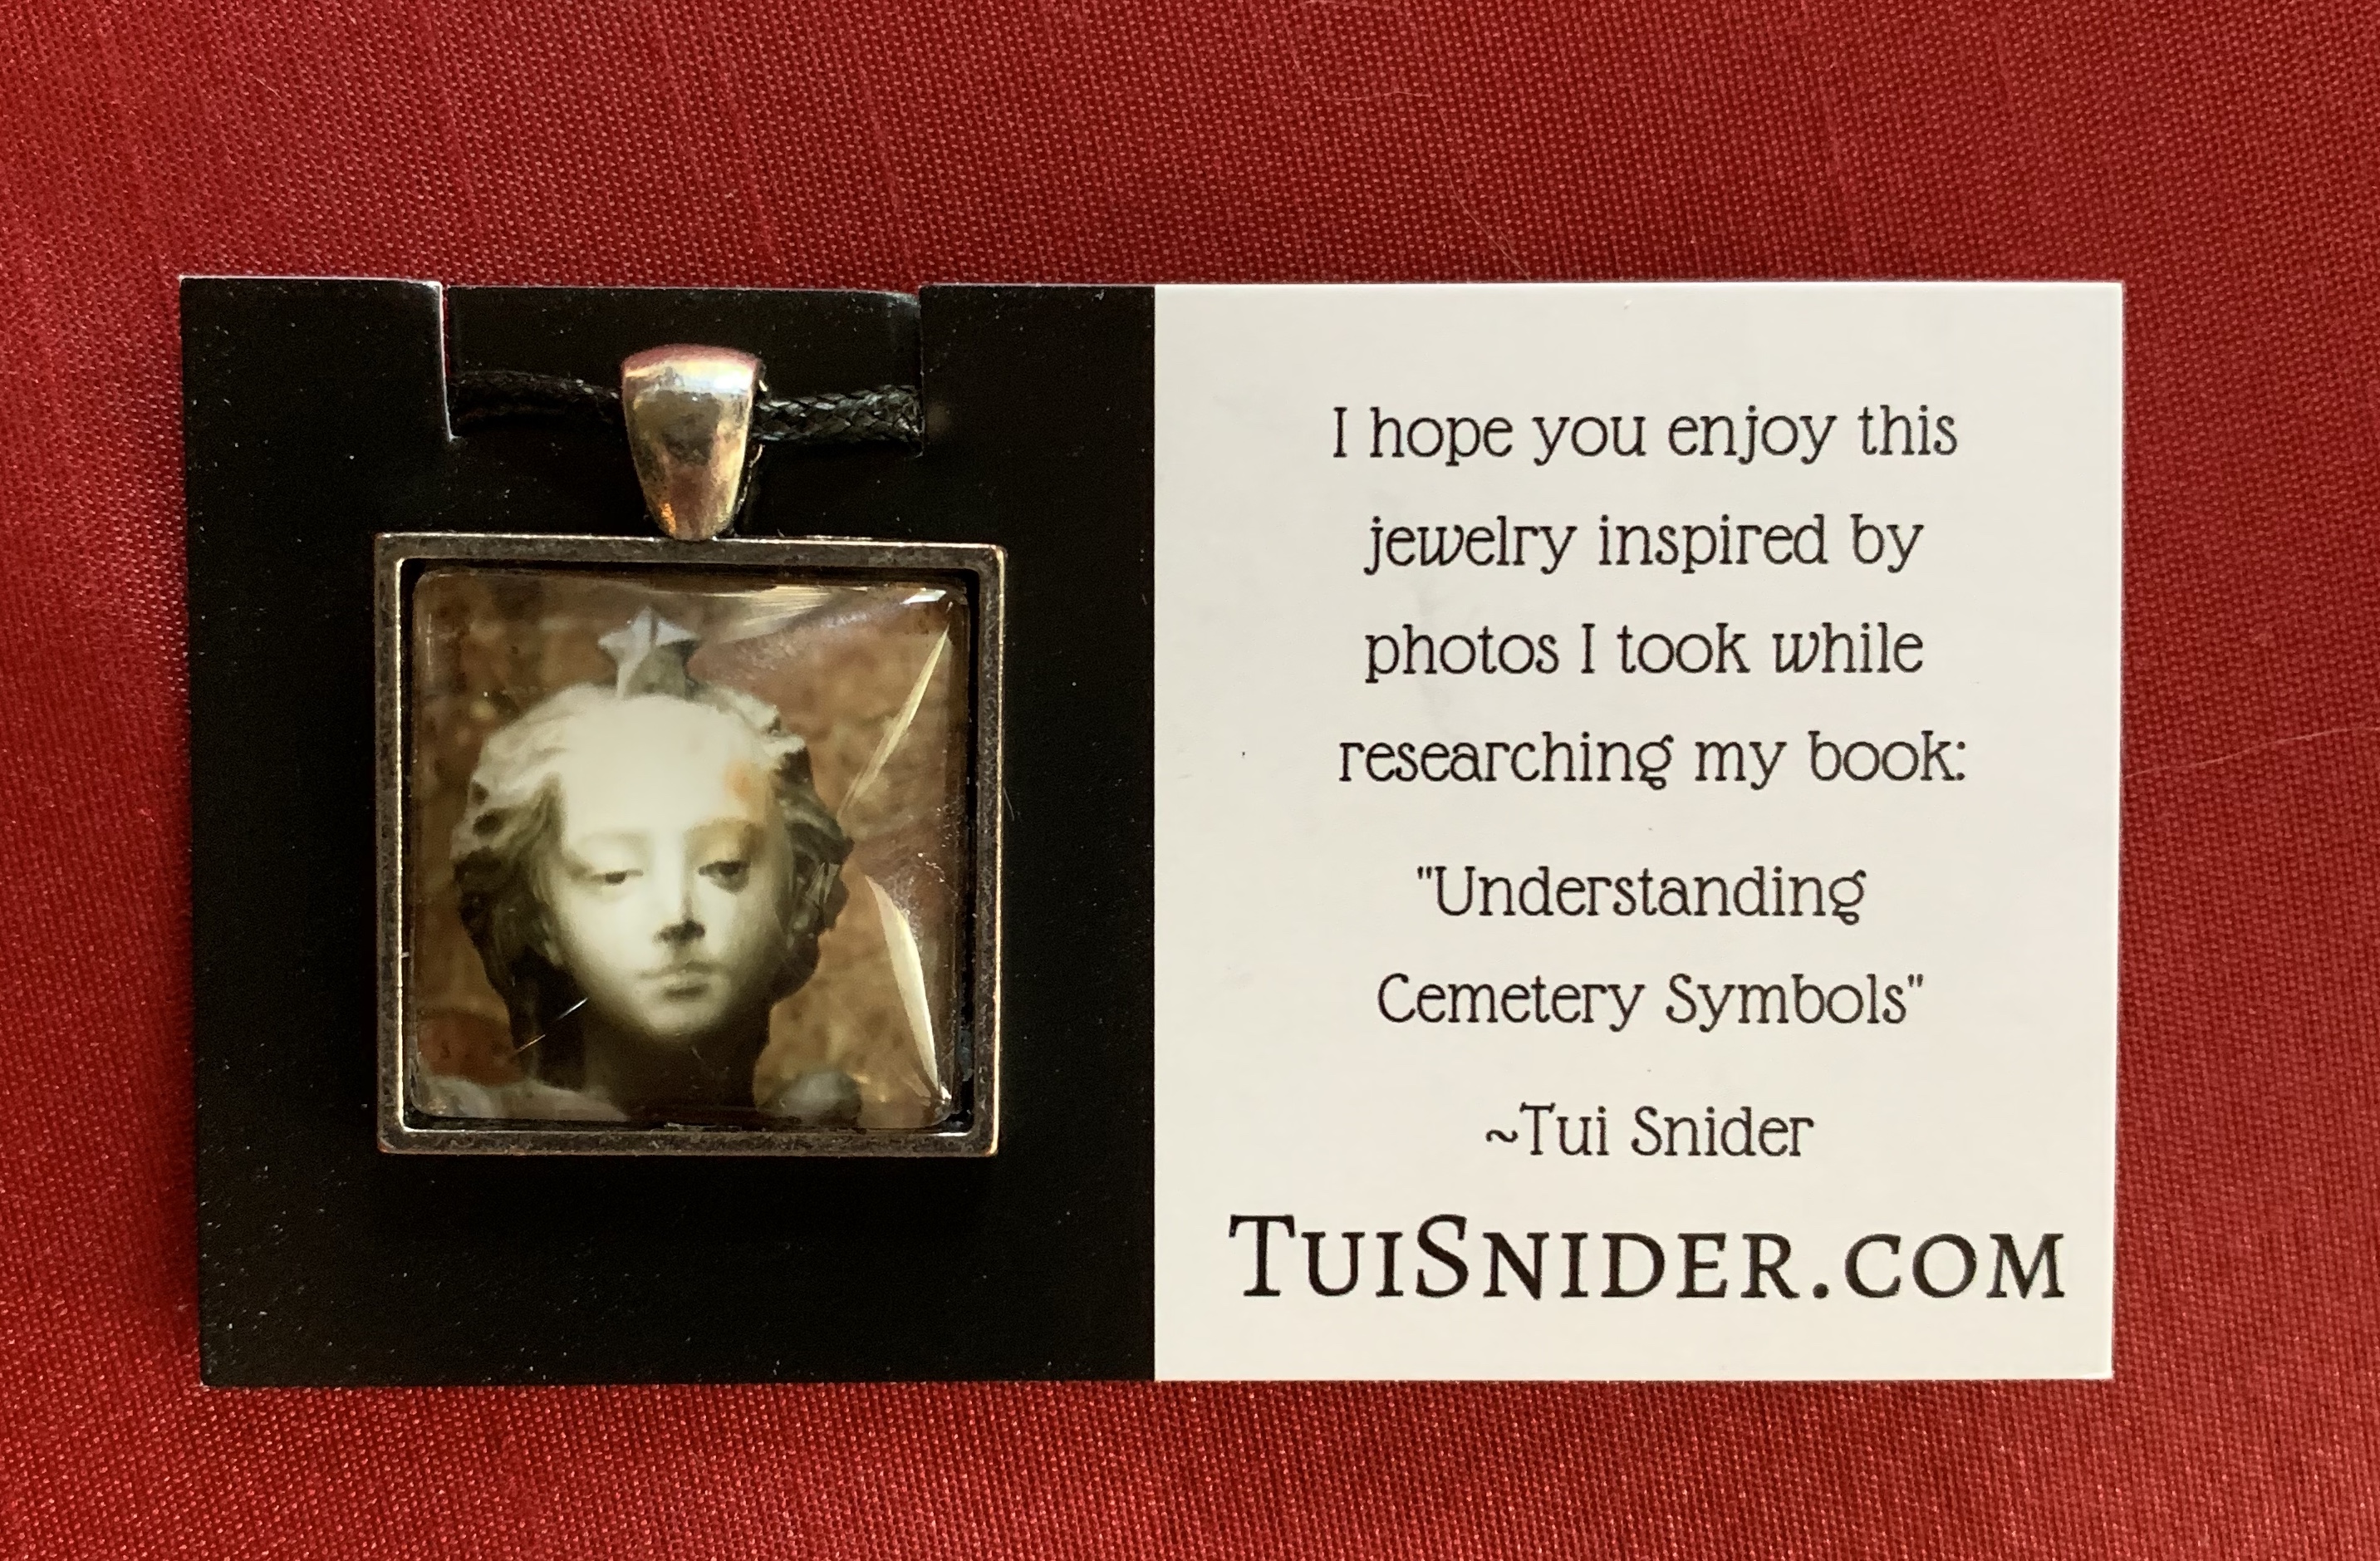 Here's an example of how the actual glass cabochon pendant necklaces look! (c) Tui Snider